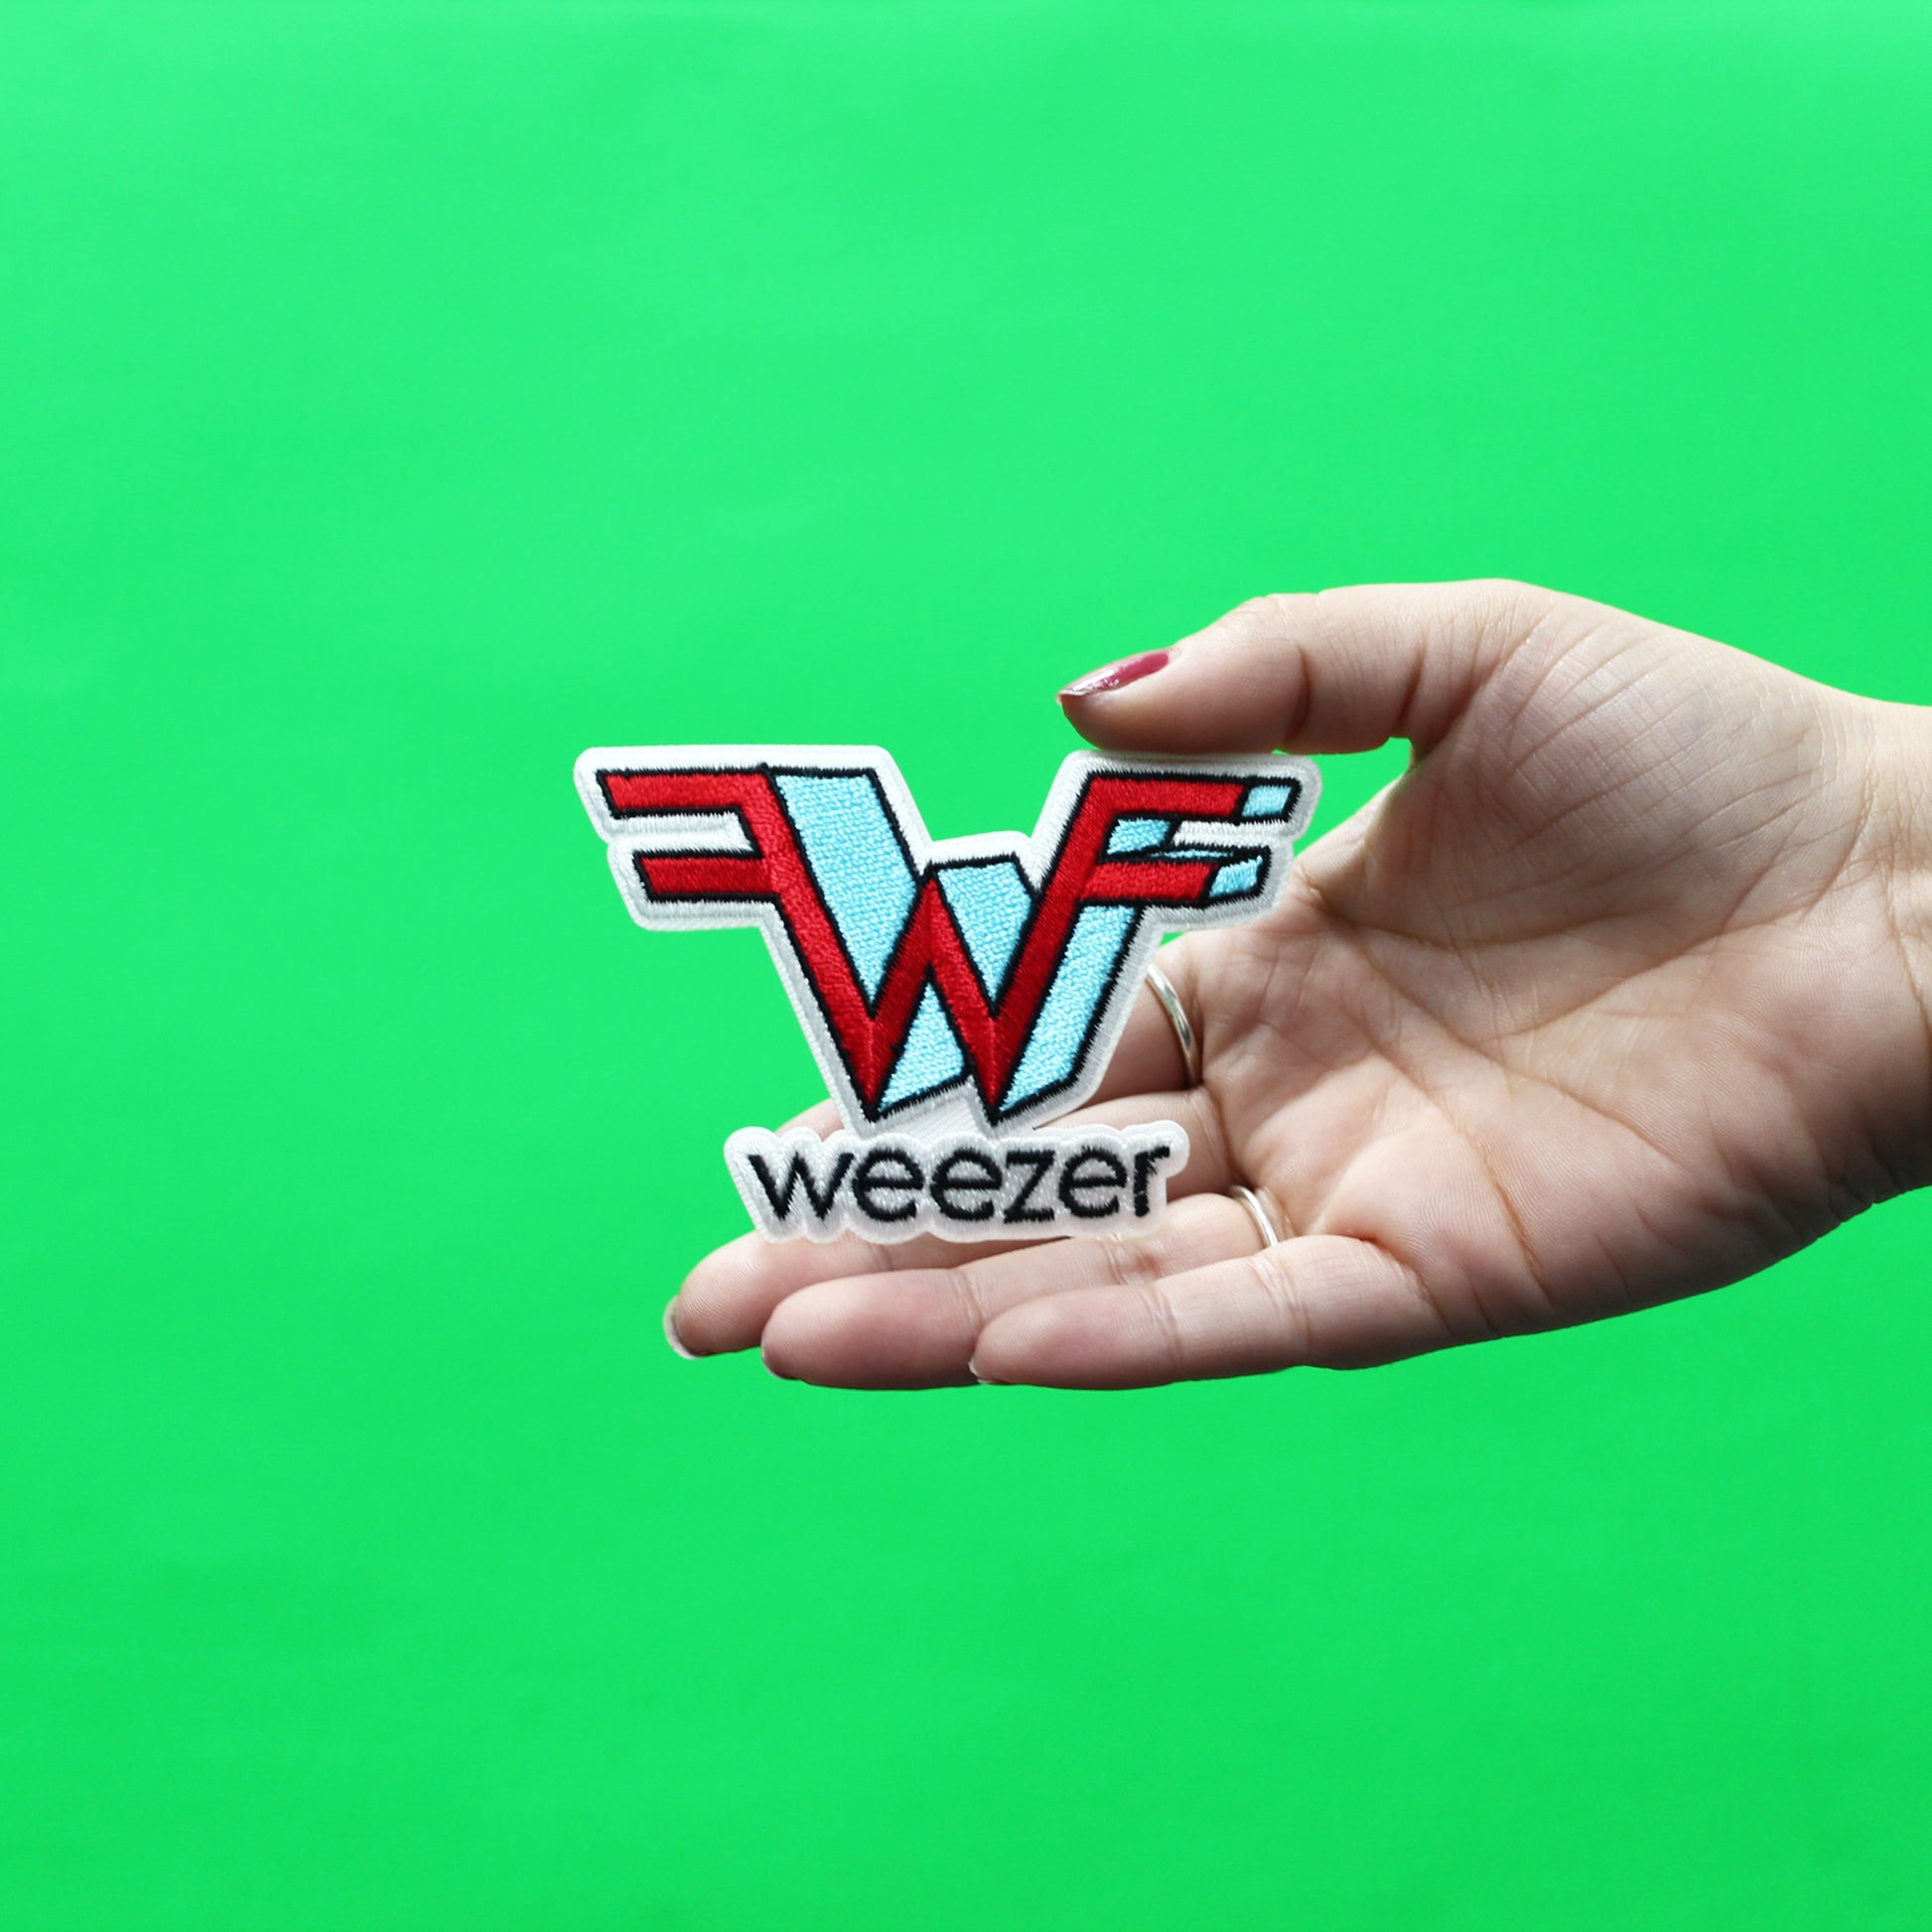 Weezer Patch 3D Logo Embroidered Iron On 